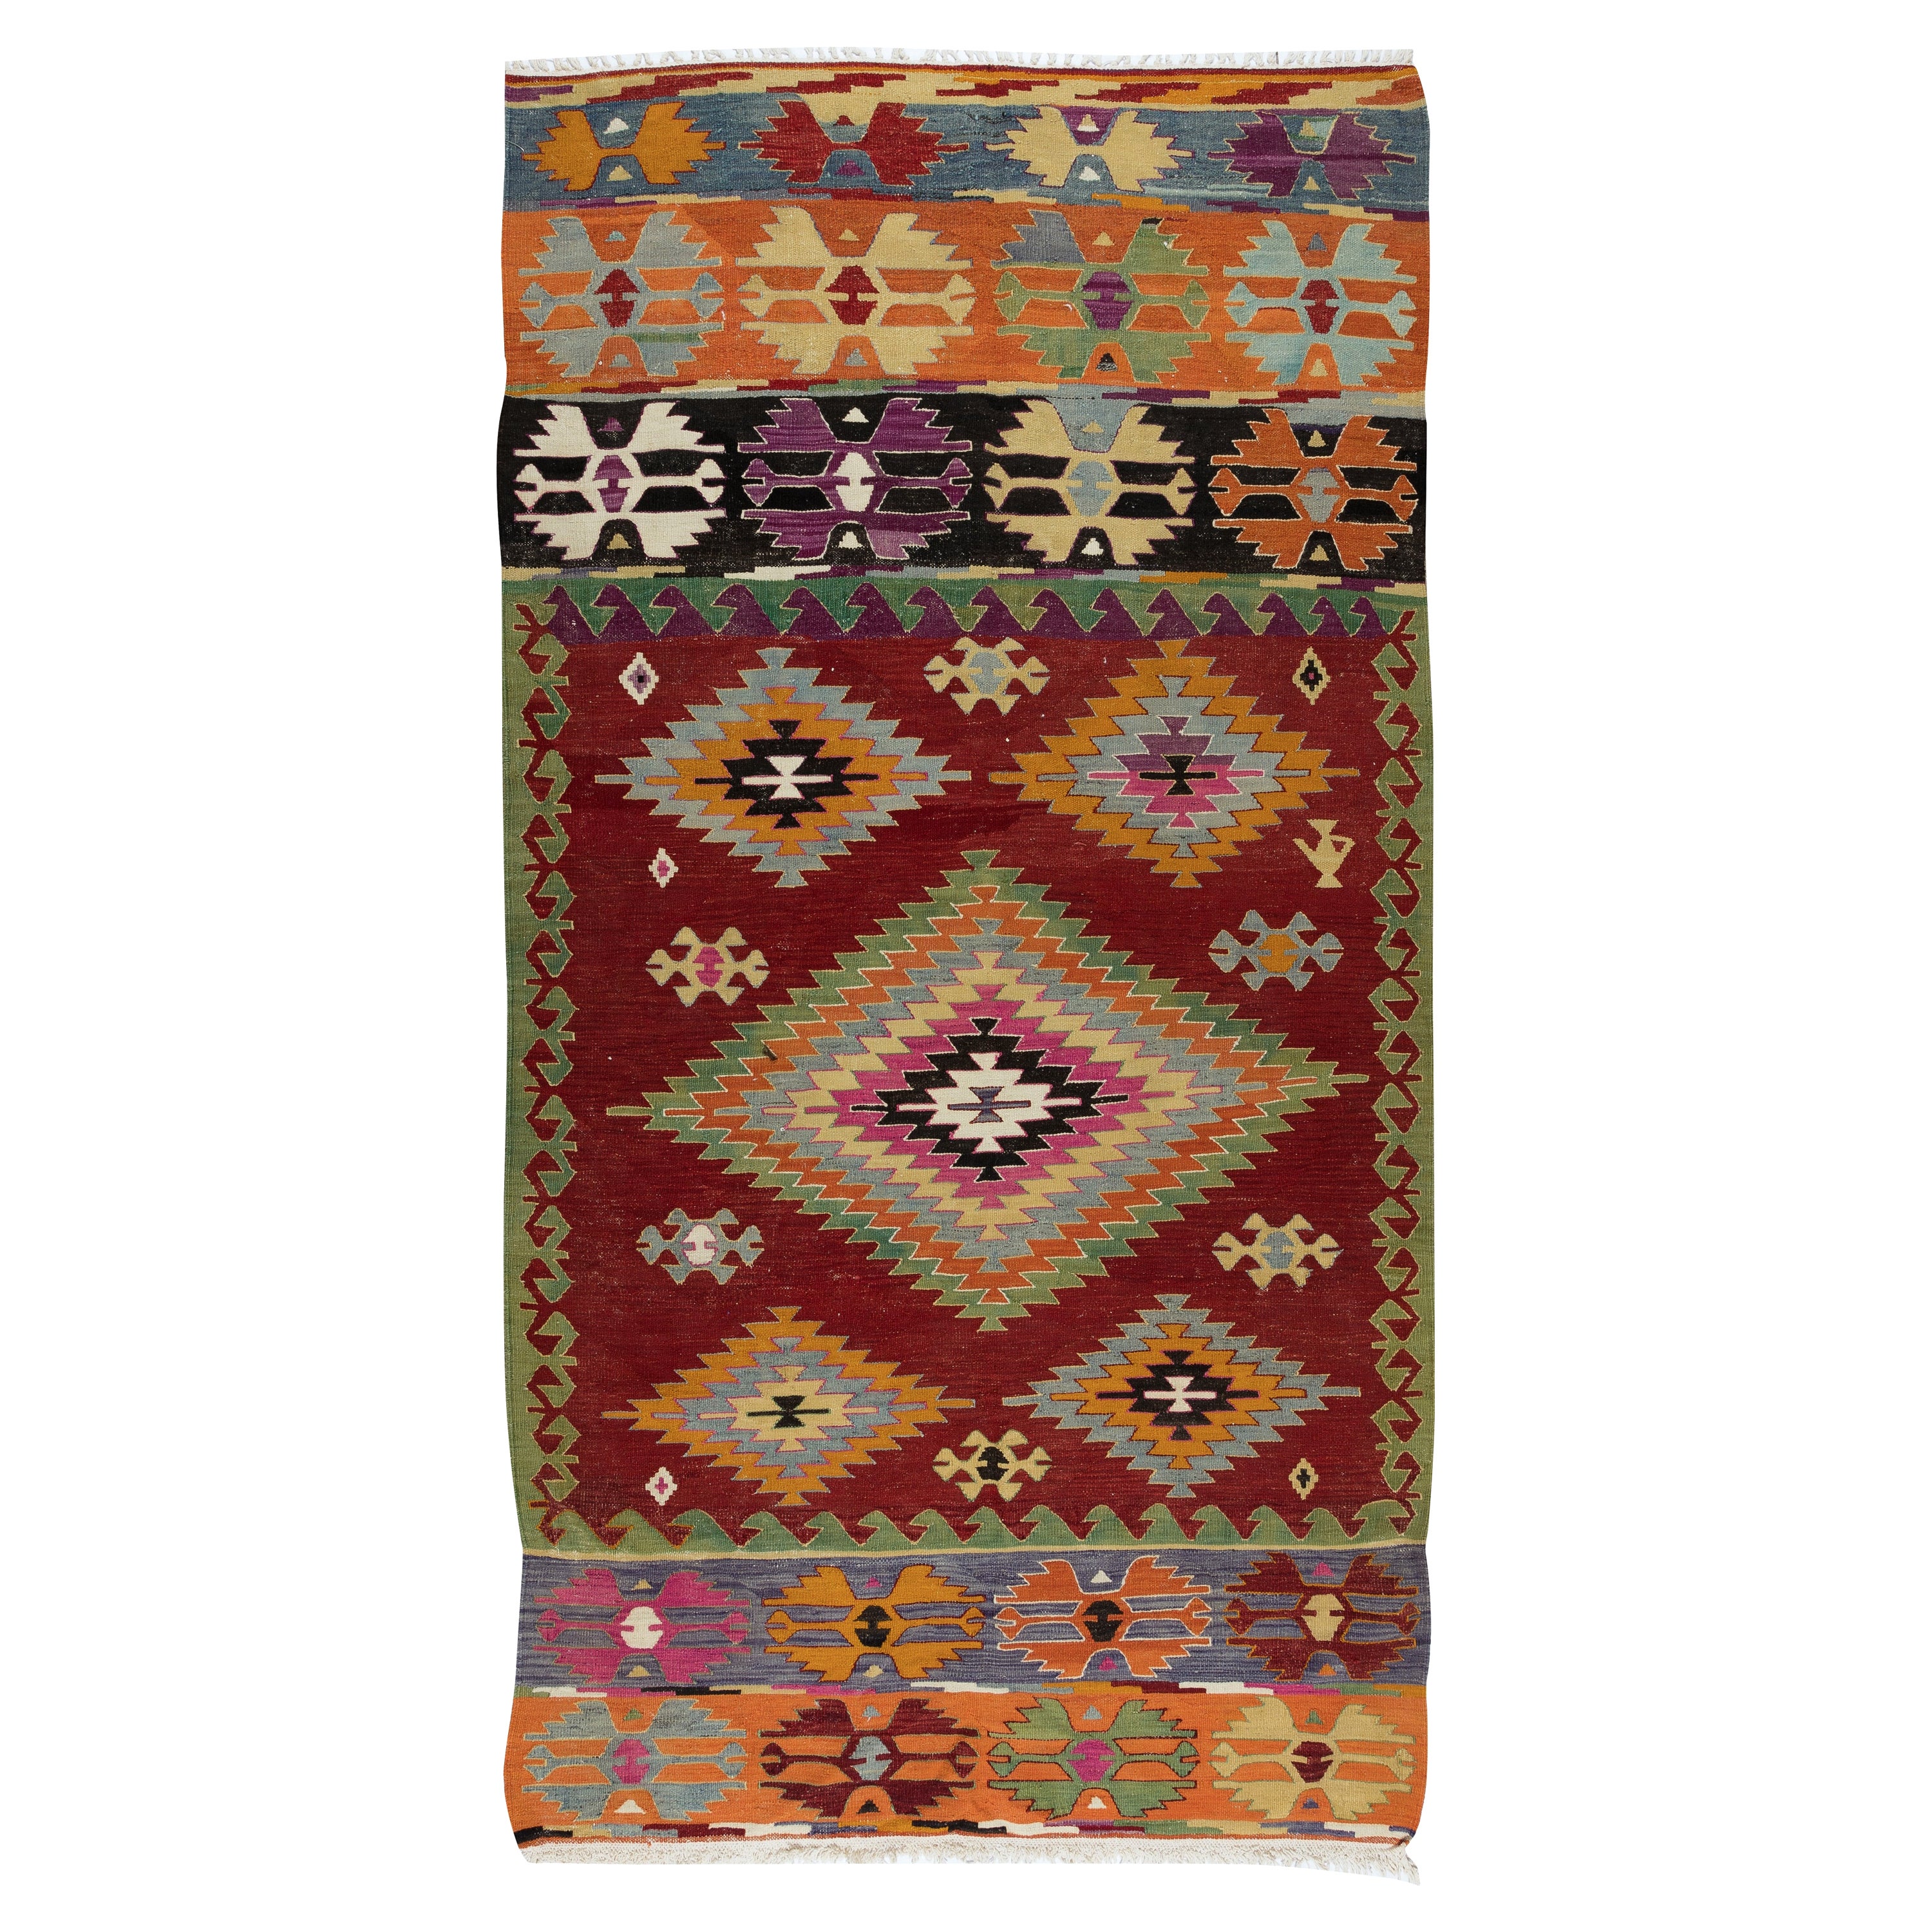 5x9.6 Ft Hand-Woven Geometric Vintage Kilim From Turkey, 100% Wool, Colorful Rug For Sale